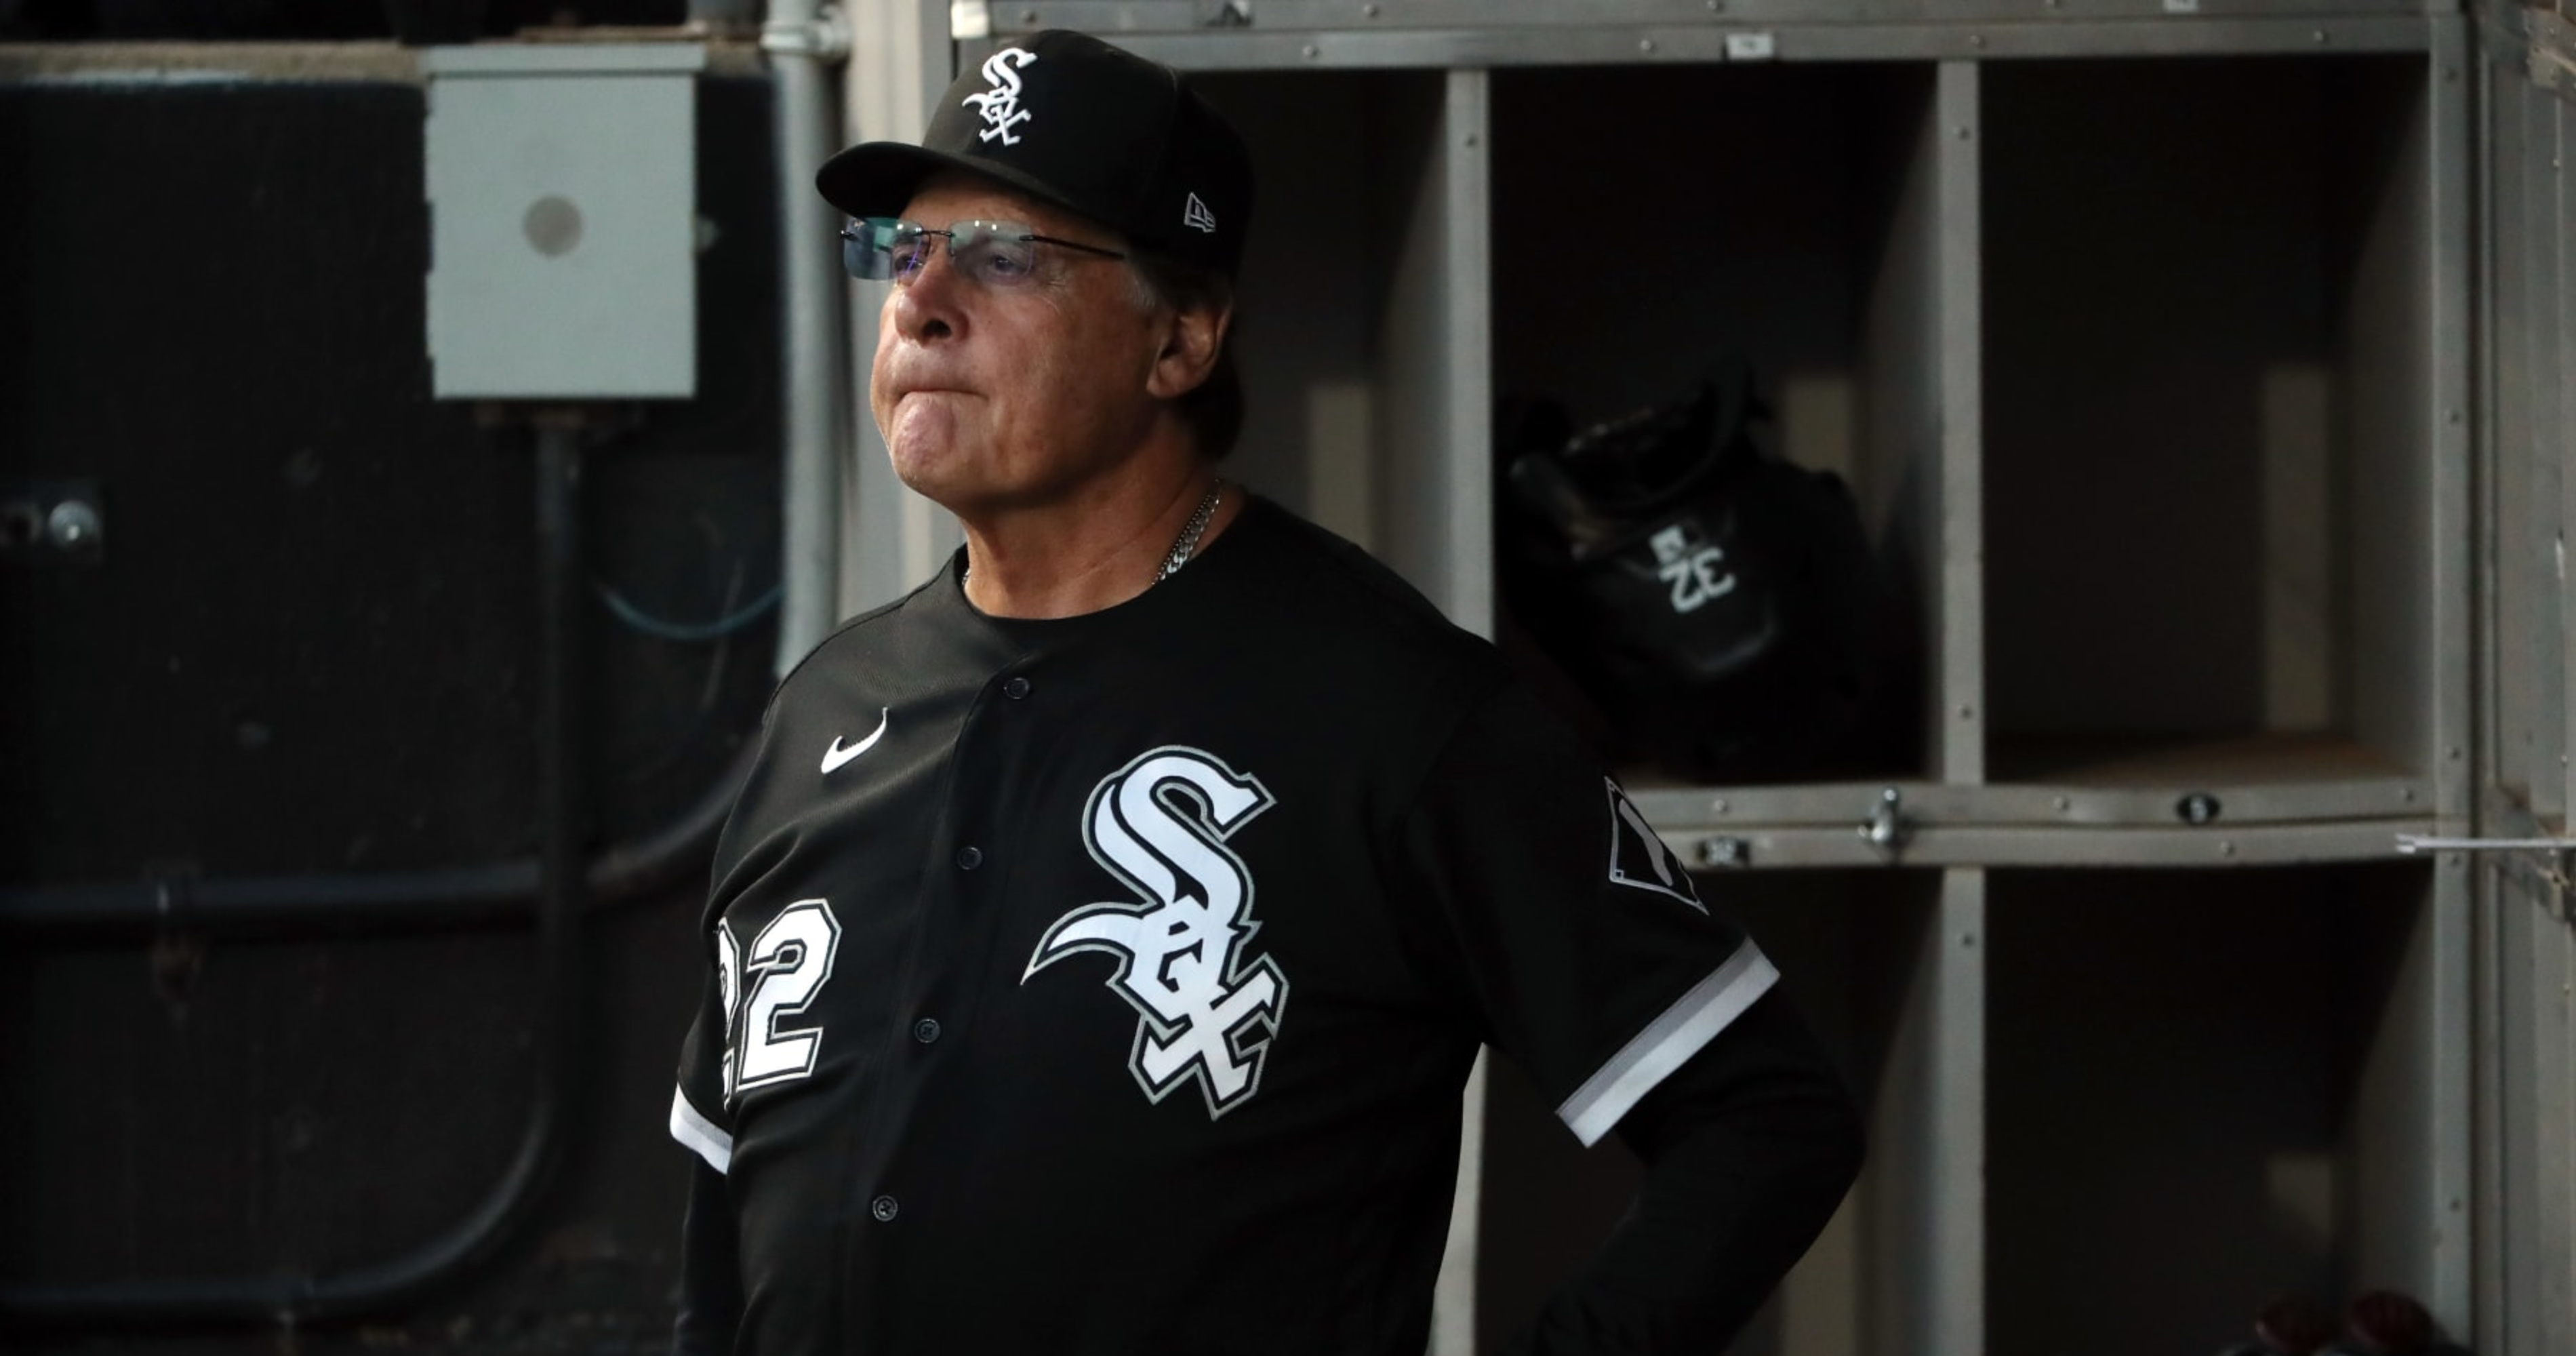 Tony La Russa stepping down as Chicago White Sox manager because